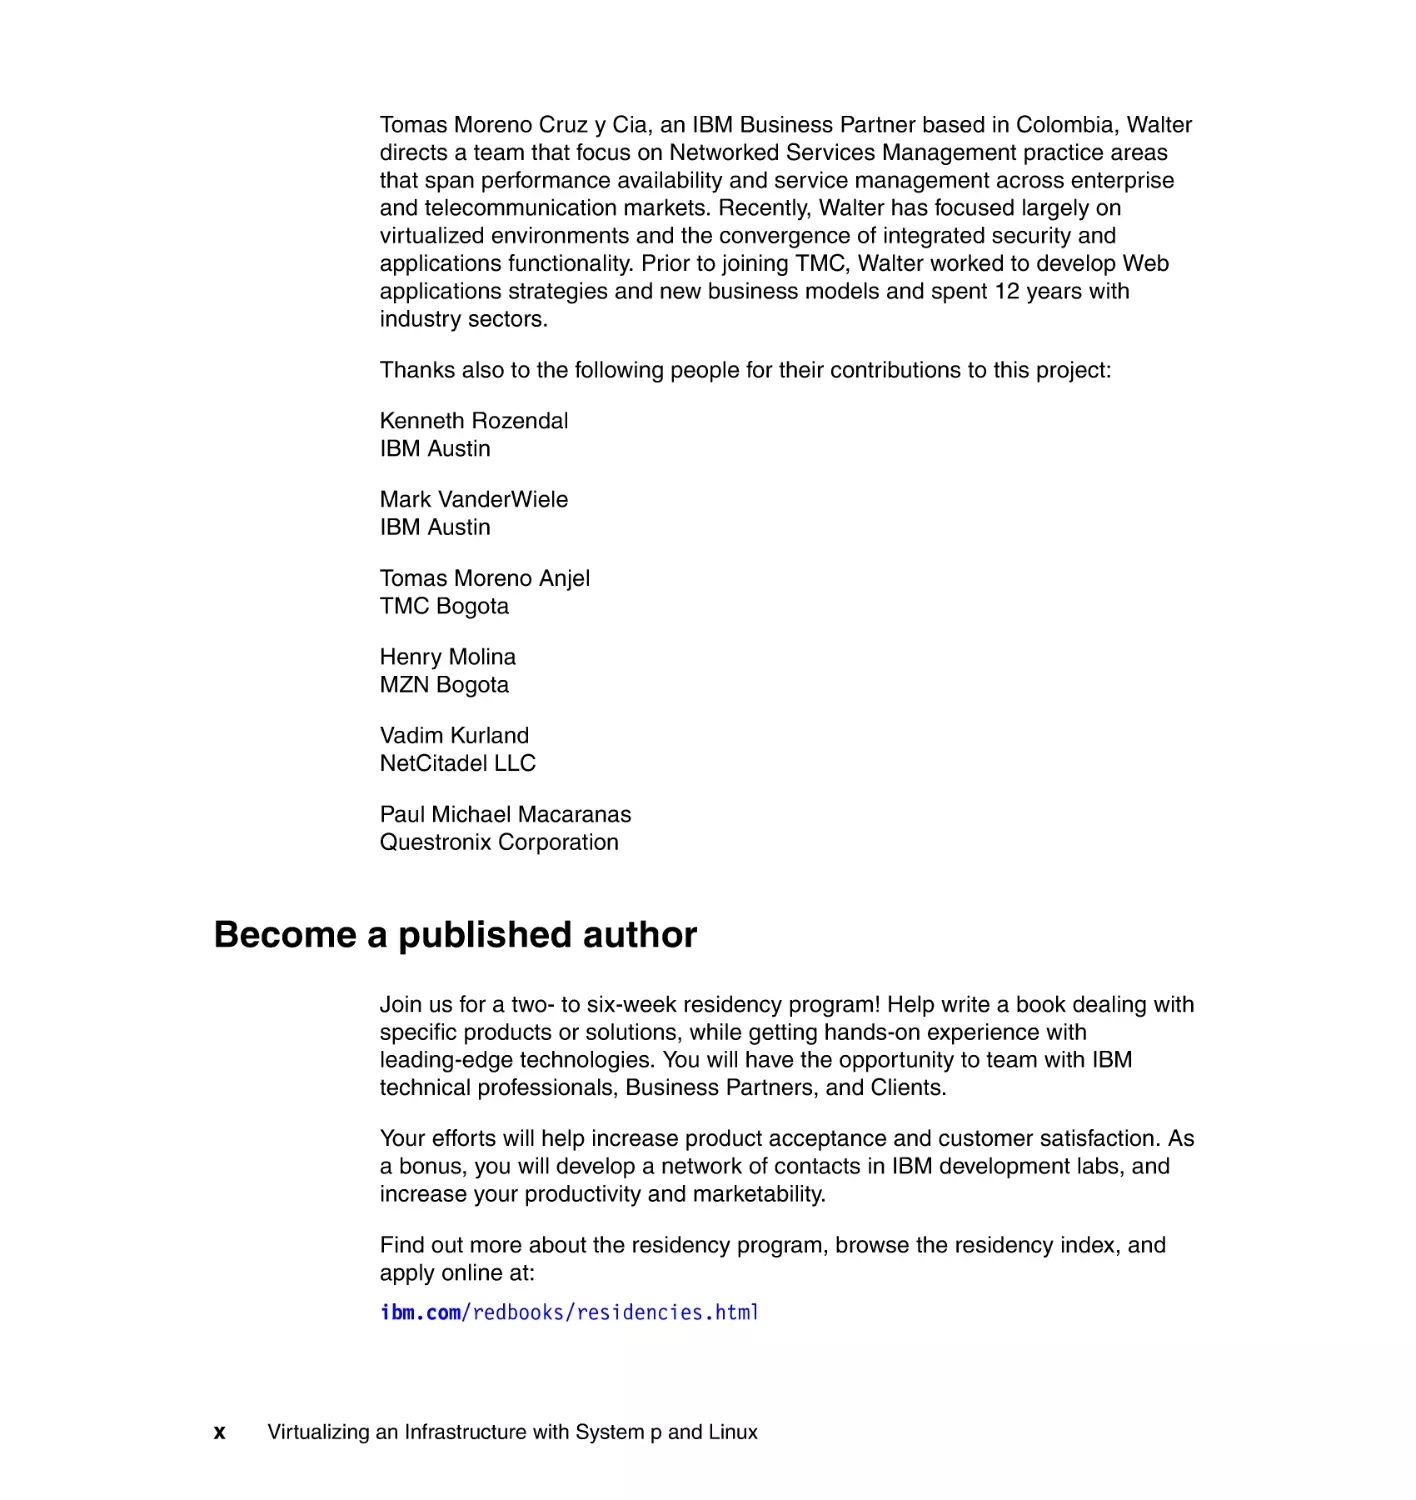 Become a published author